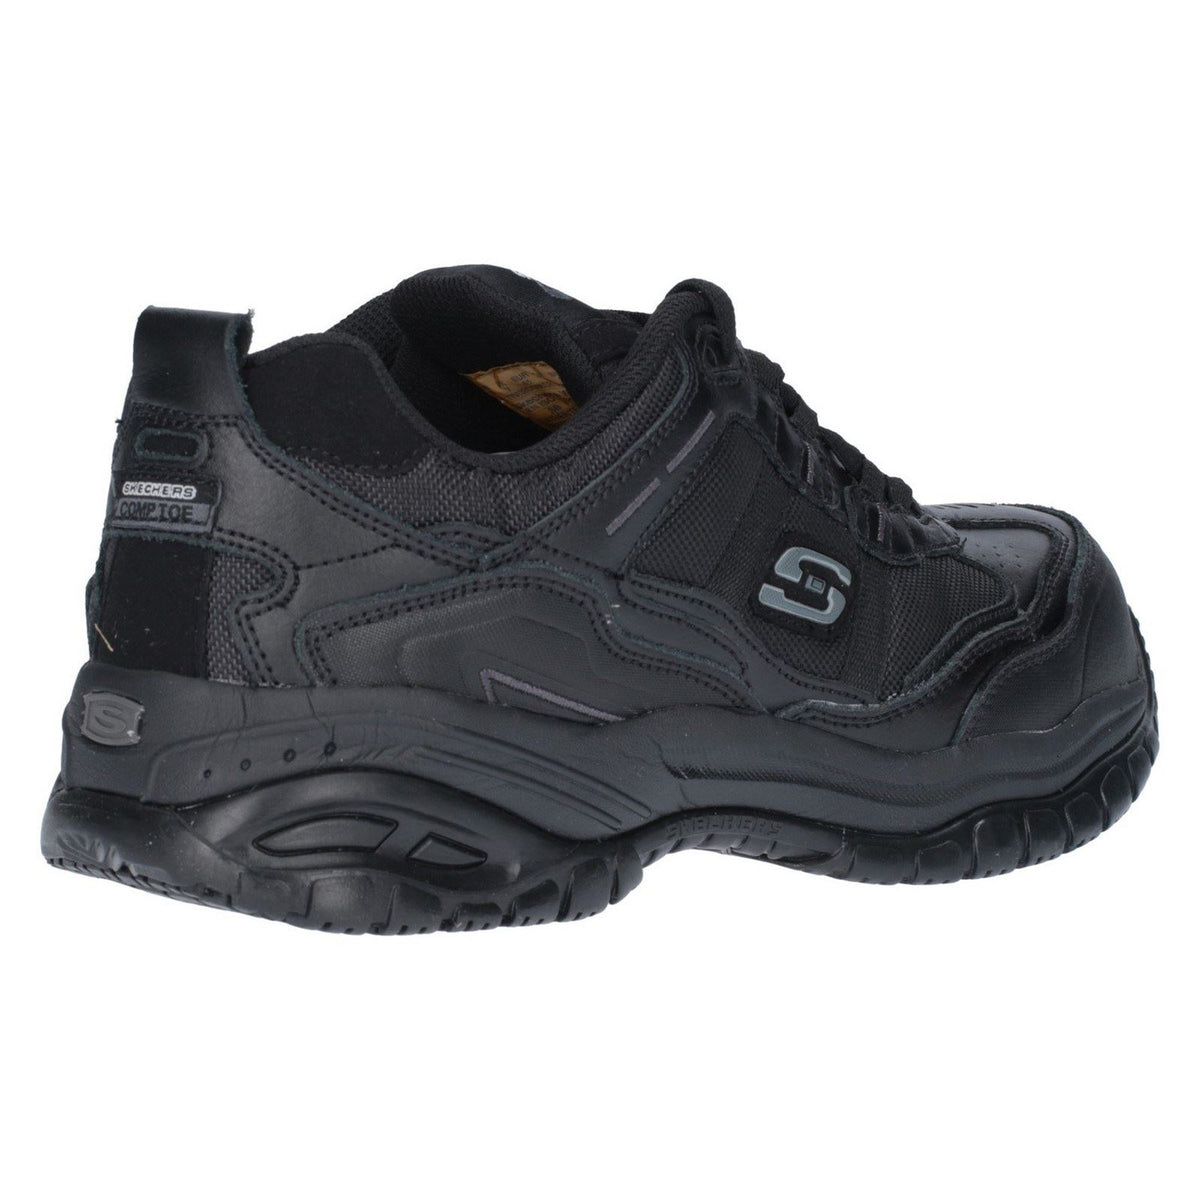 Skechers Soft Stride - Grinnell Safety Shoes